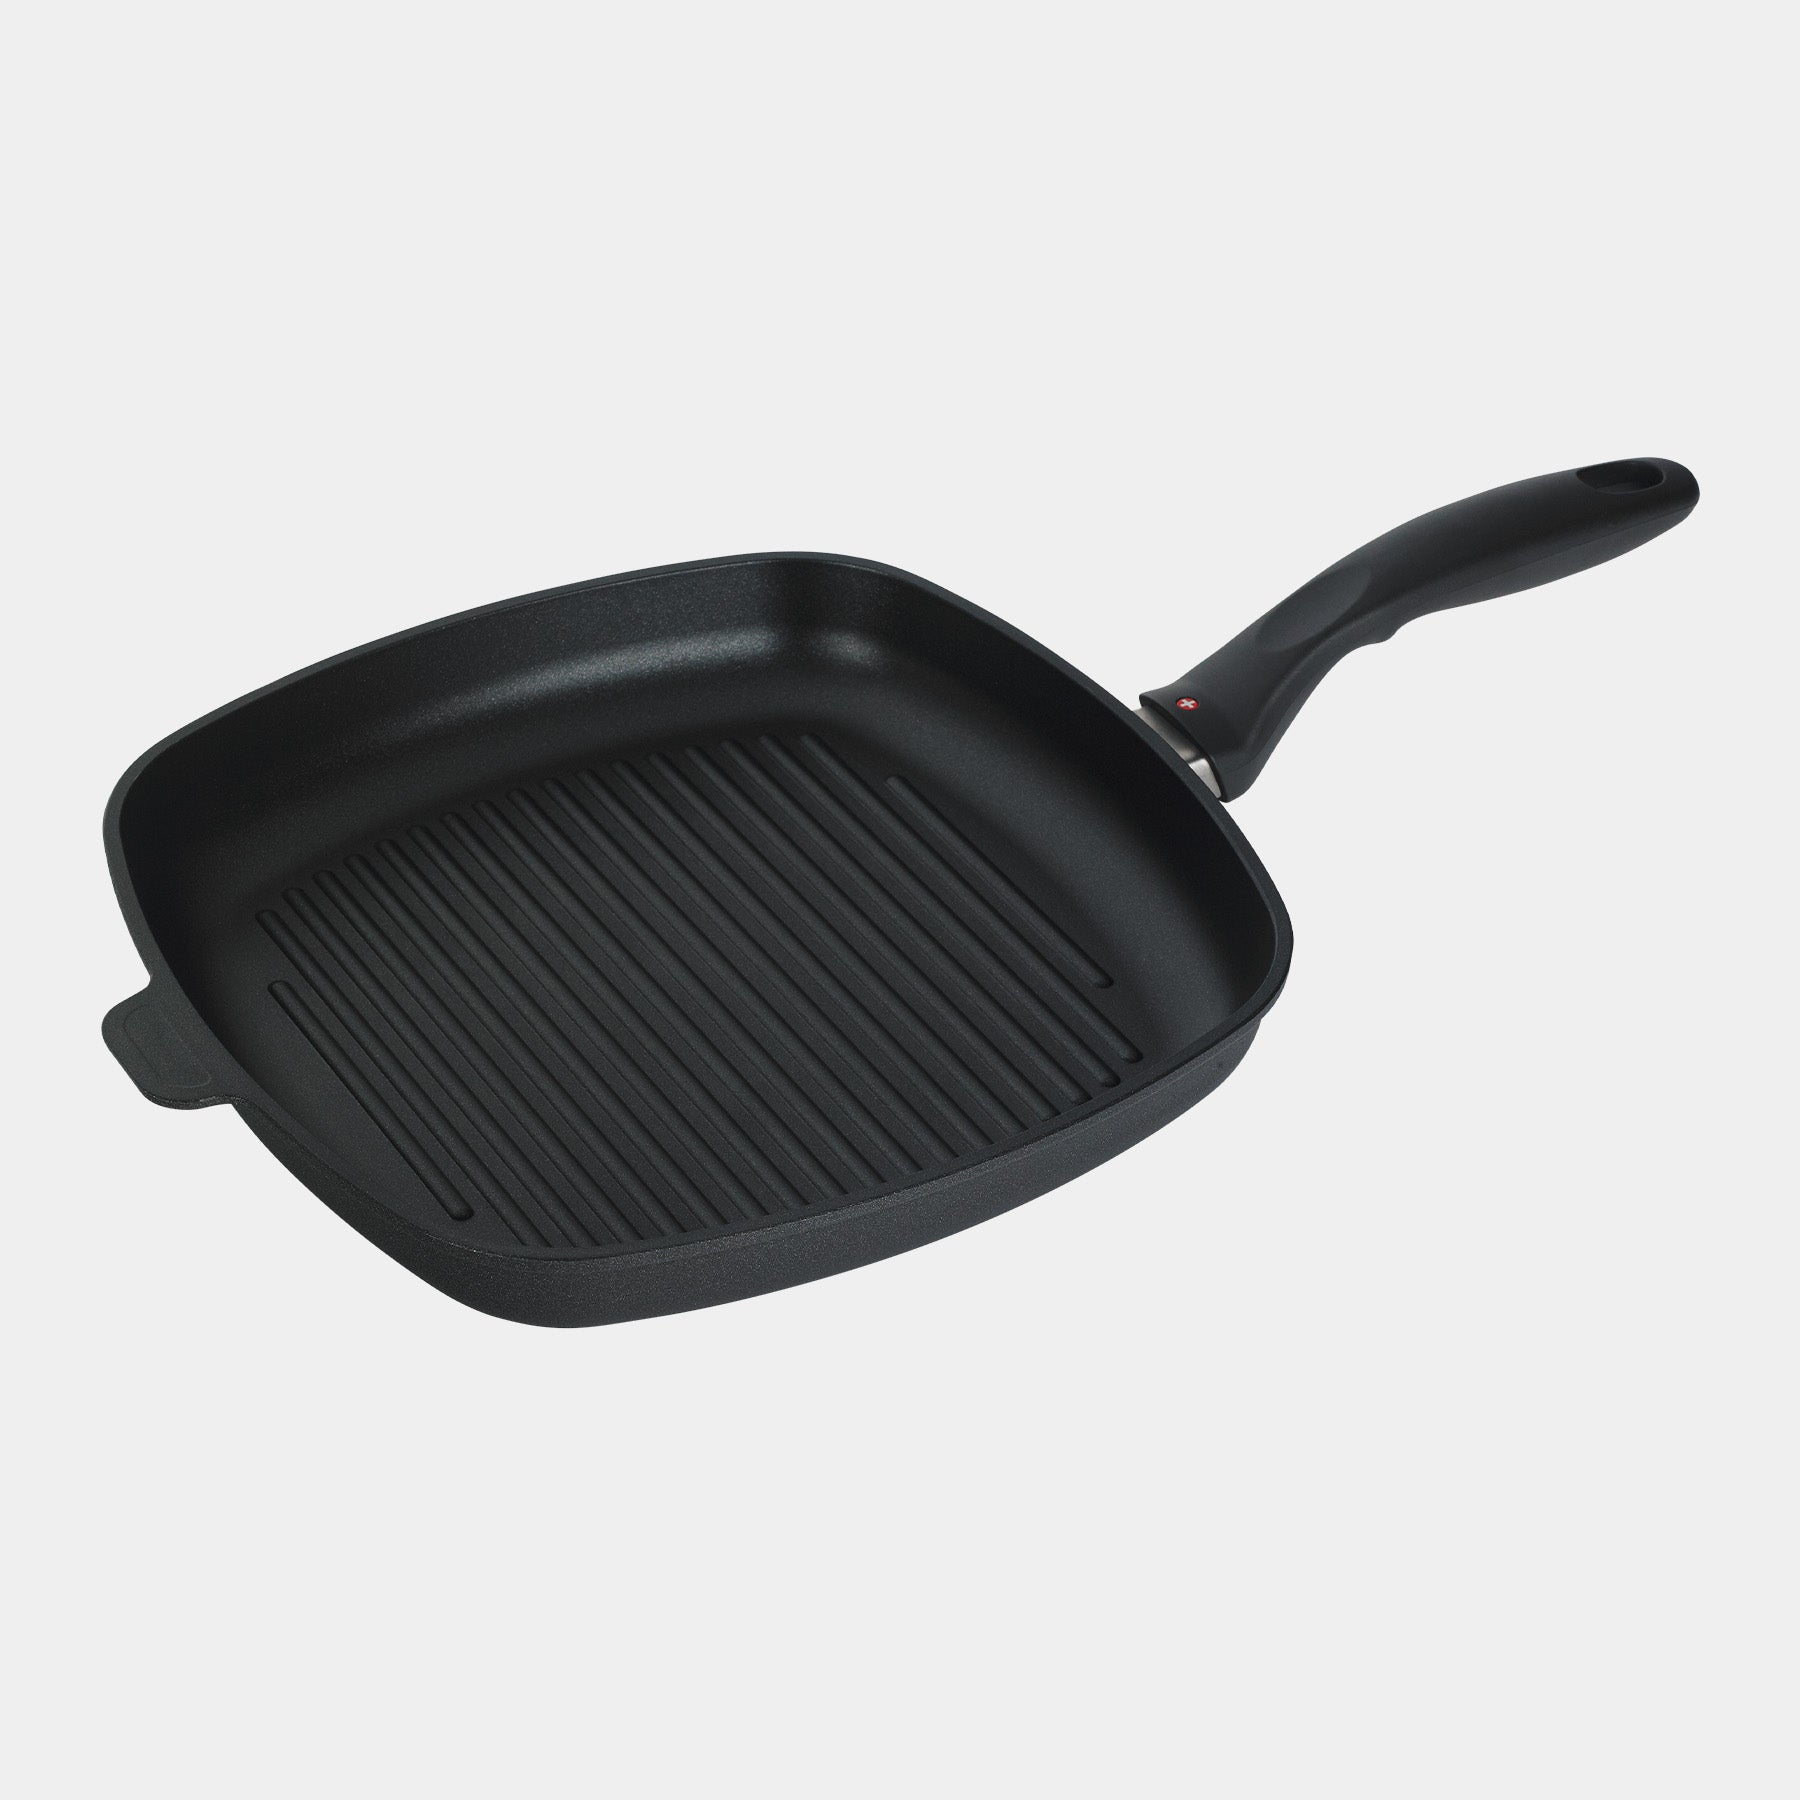 XD Nonstick 11" x 11" Square Grill Pan - Induction Top View